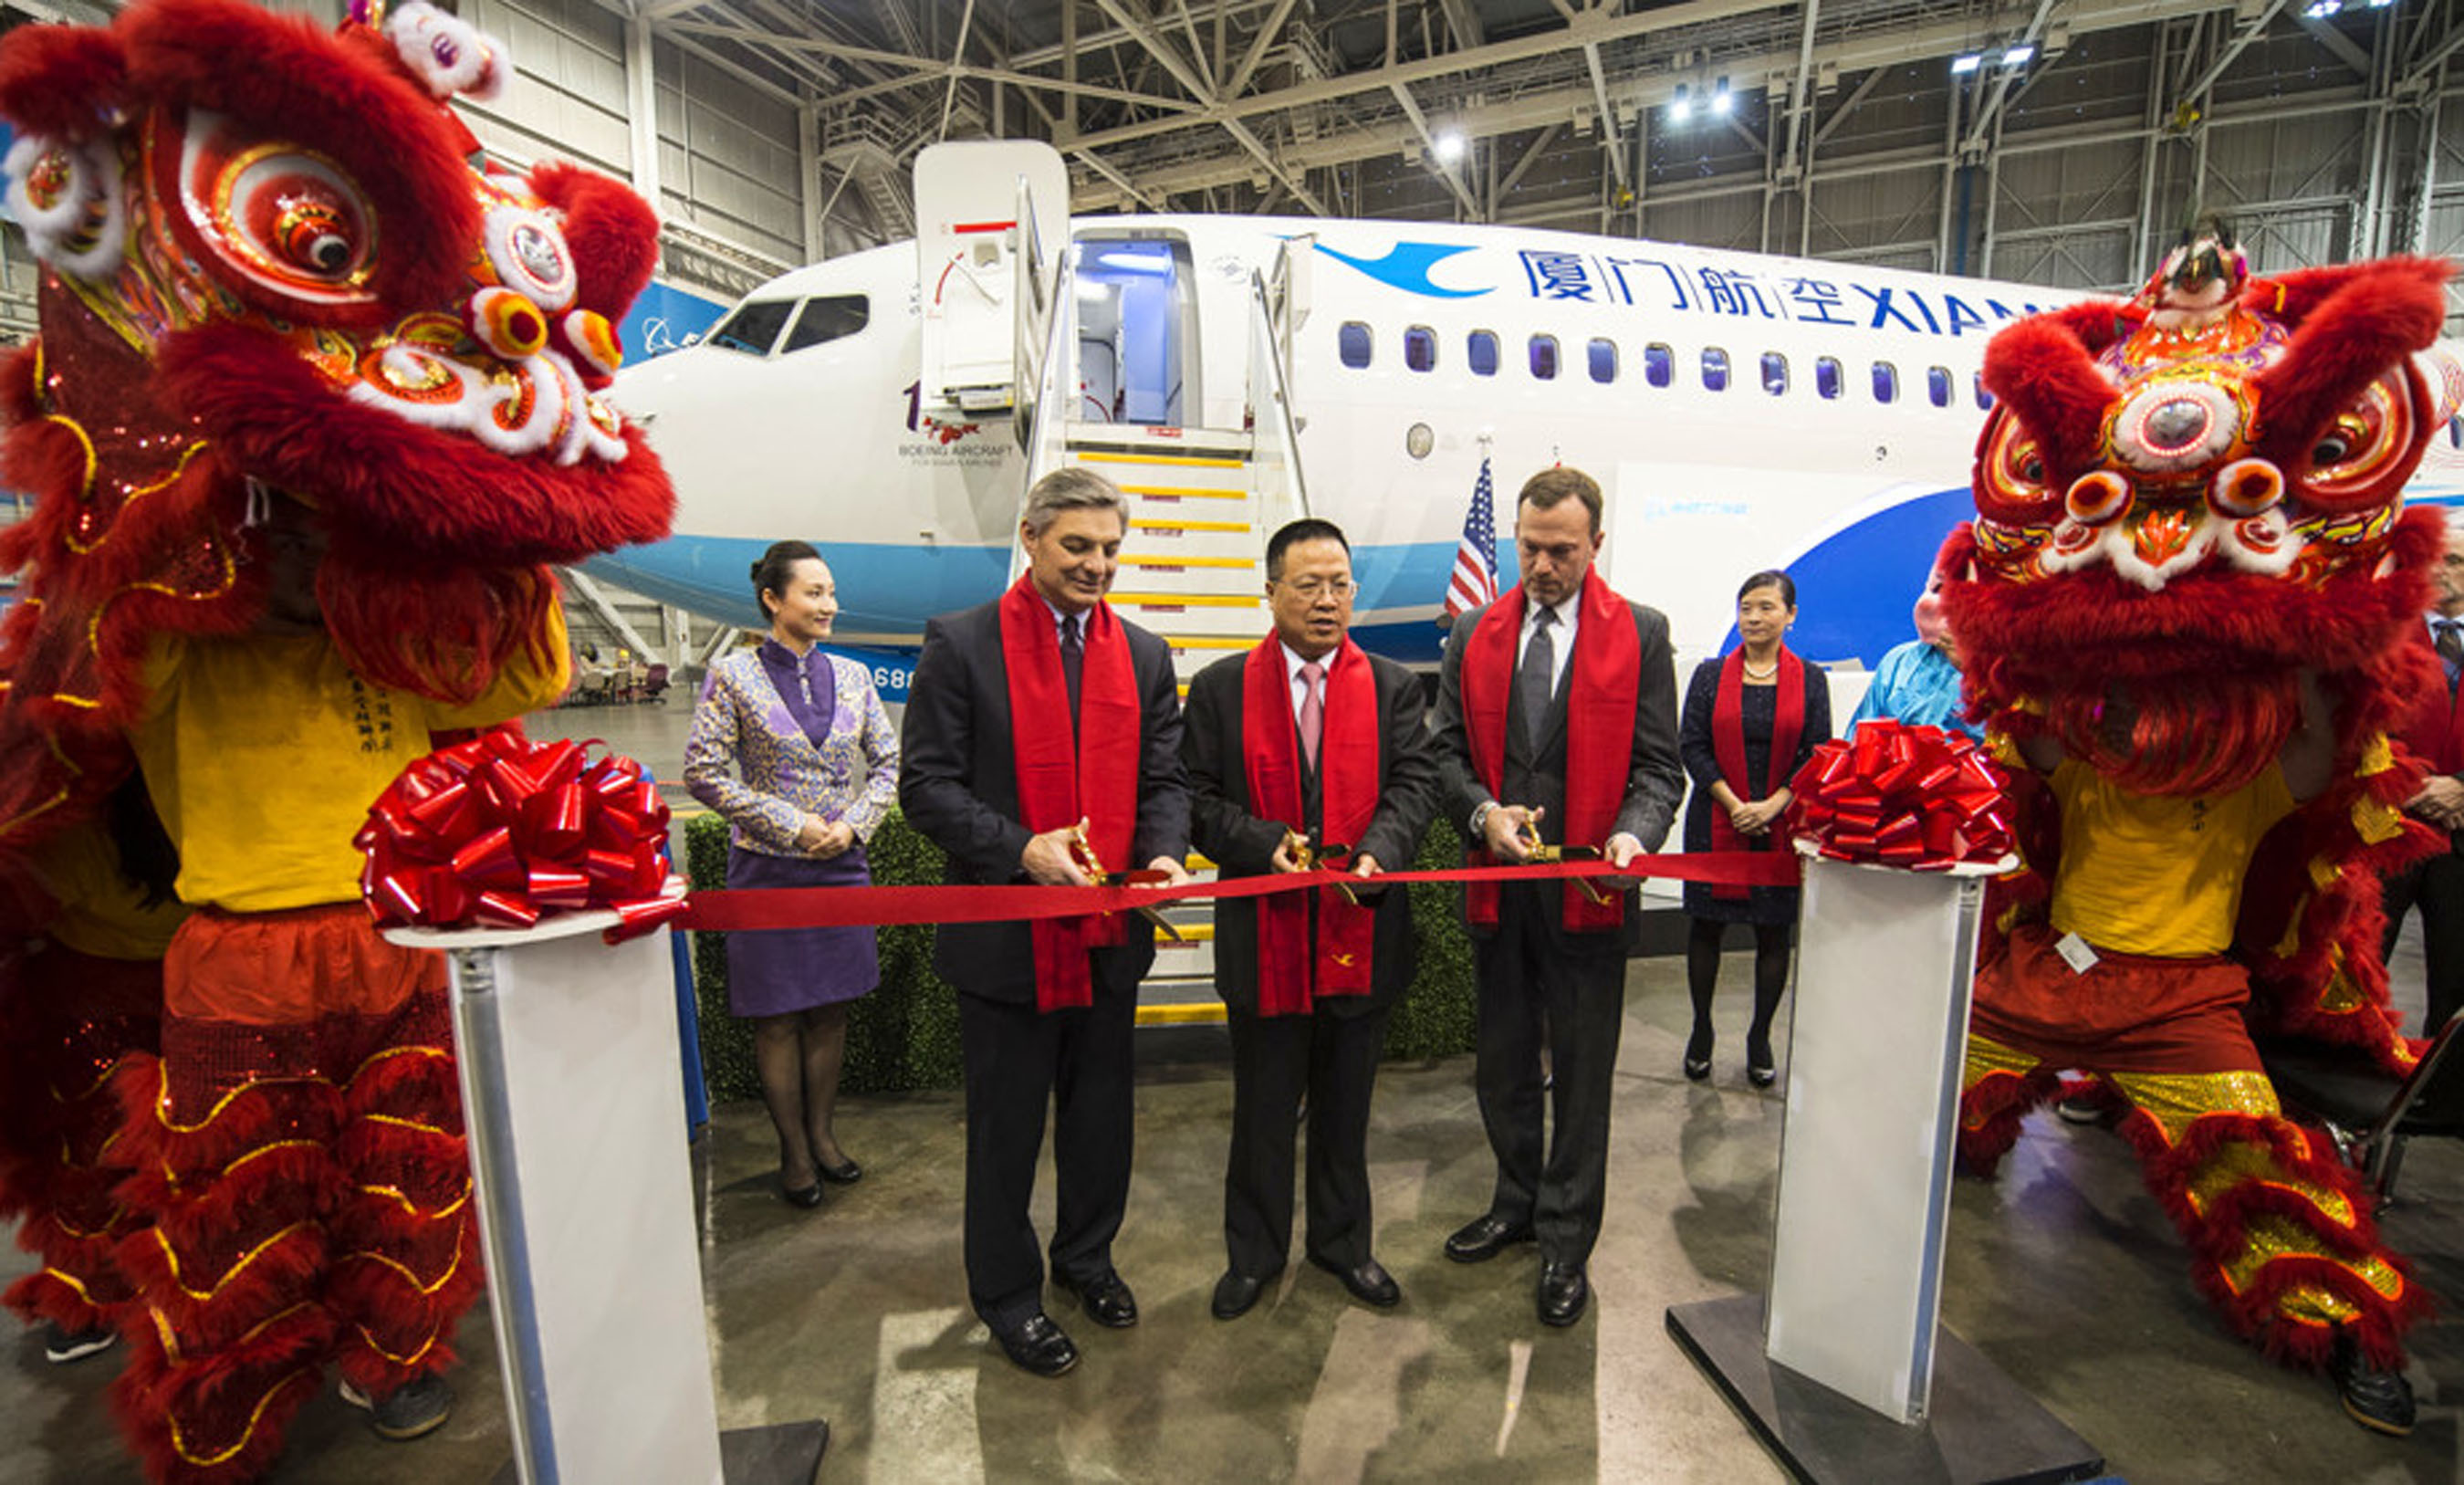 Ribbon cutters (from the left to the right): Raymond Conner, President of Boeing Commercial Airplanes, Inc., Che Shanglun, Chairman and General Manager of Xiamen Airlines and head of International Lease Finance Corporation (ILFC). (PRNewsFoto/Xiamen Airlines) (PRNewsFoto/XIAMEN AIRLINES)